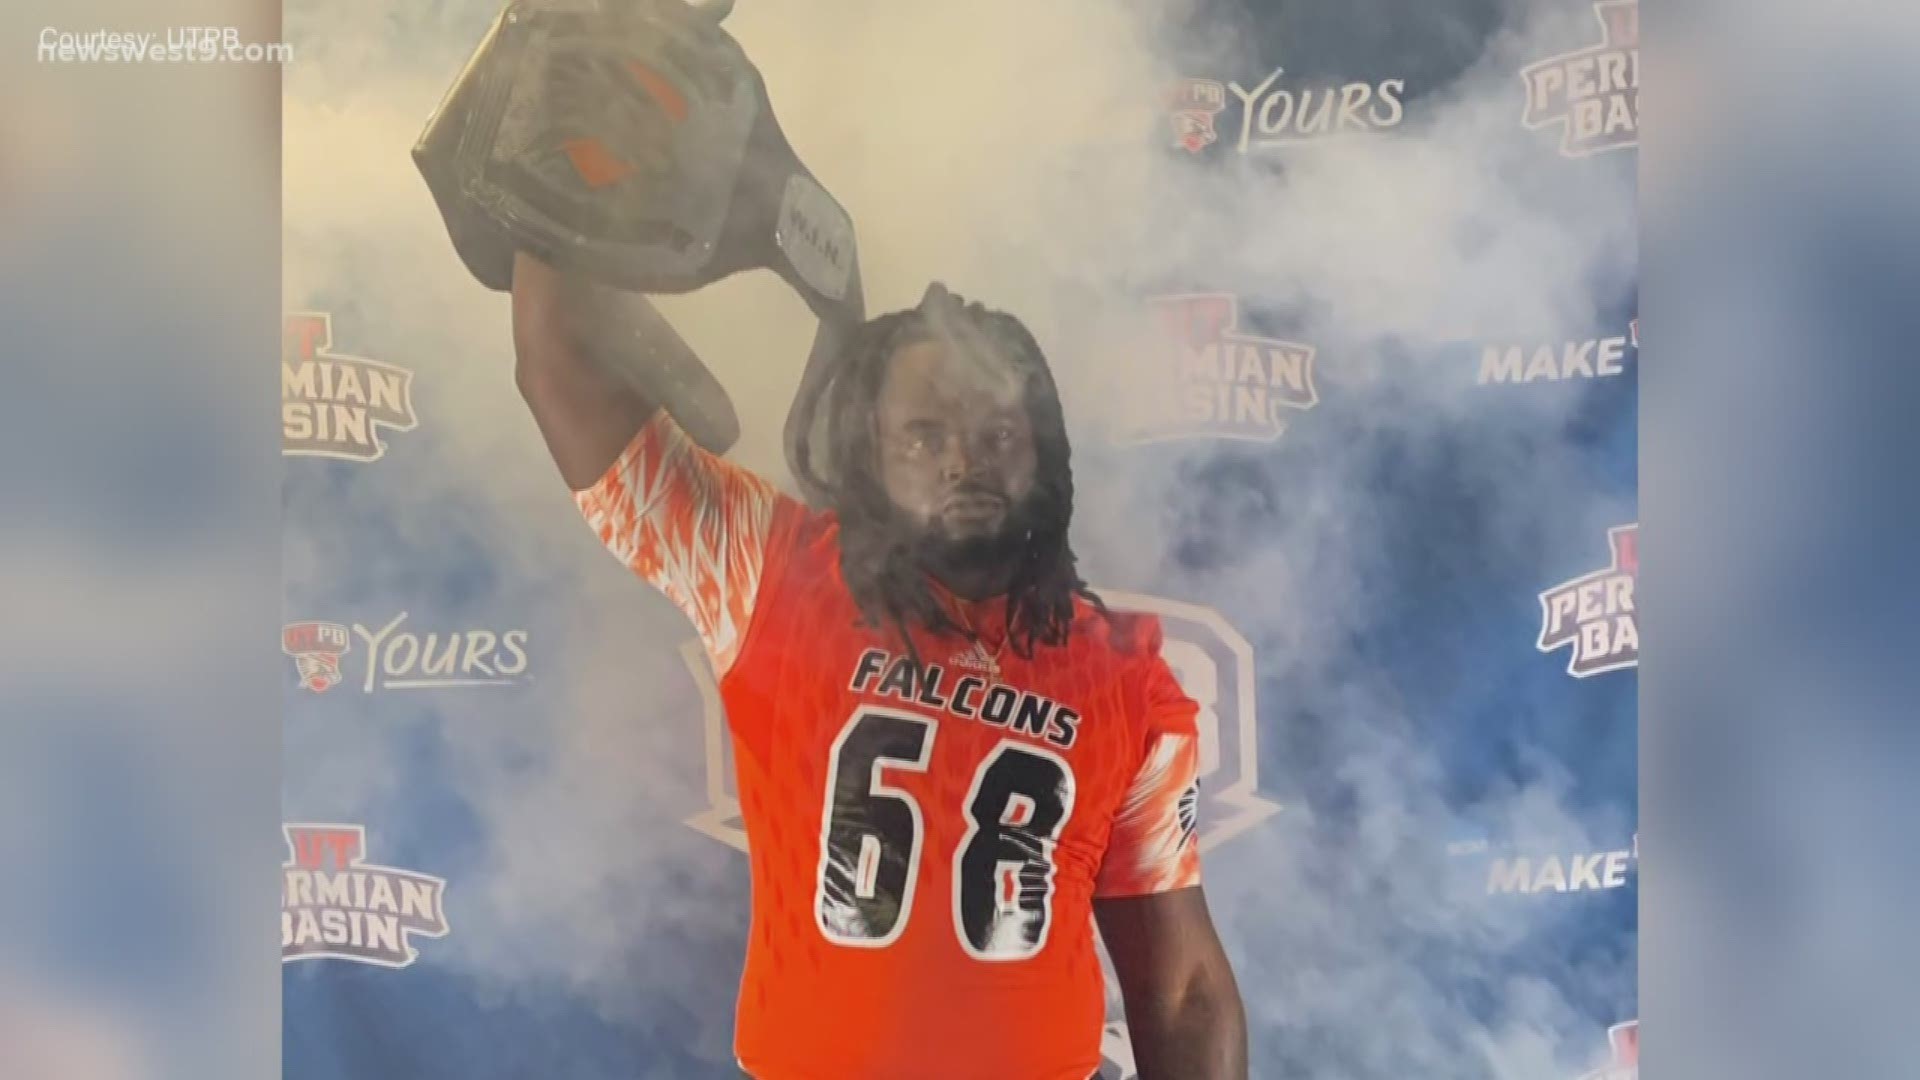 UTPB Football's new top-ranked offensive lineman, Desmond Bland, explains the differences between JUCO and a 4-year college football experience.